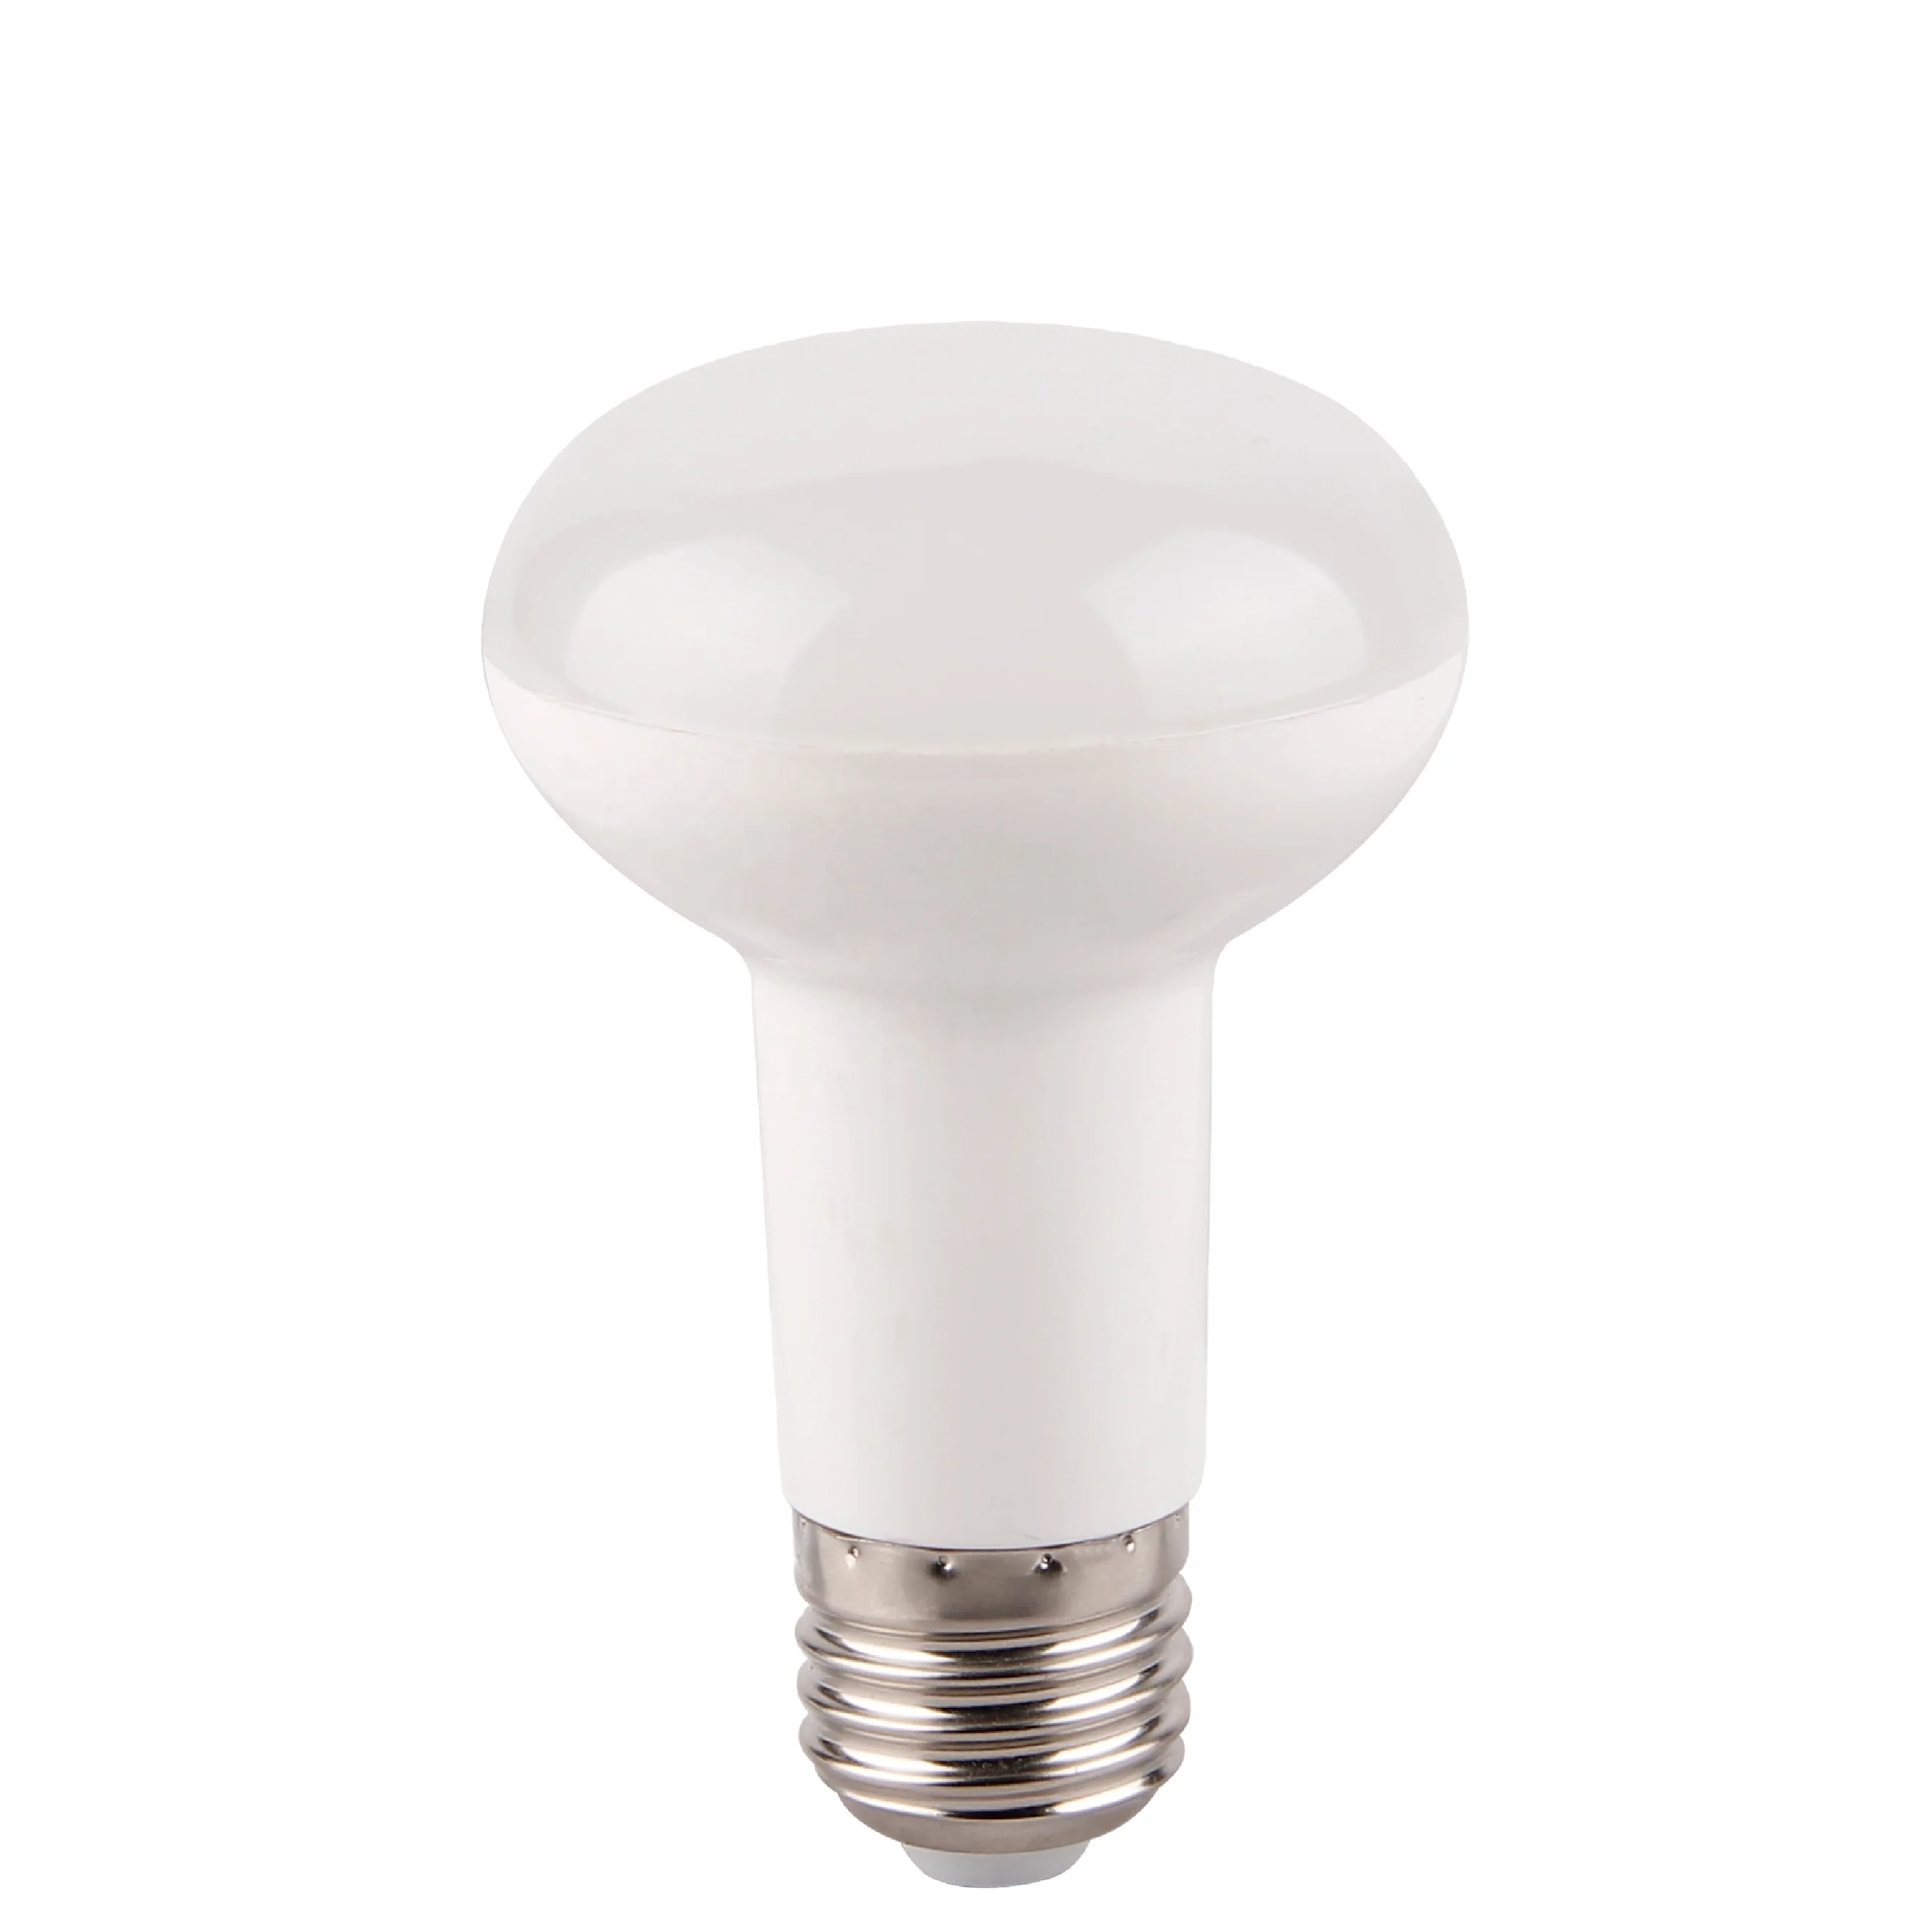 manufacture led bulb 10W  900LM R63 E27 lampara lights CE RoHs raw material